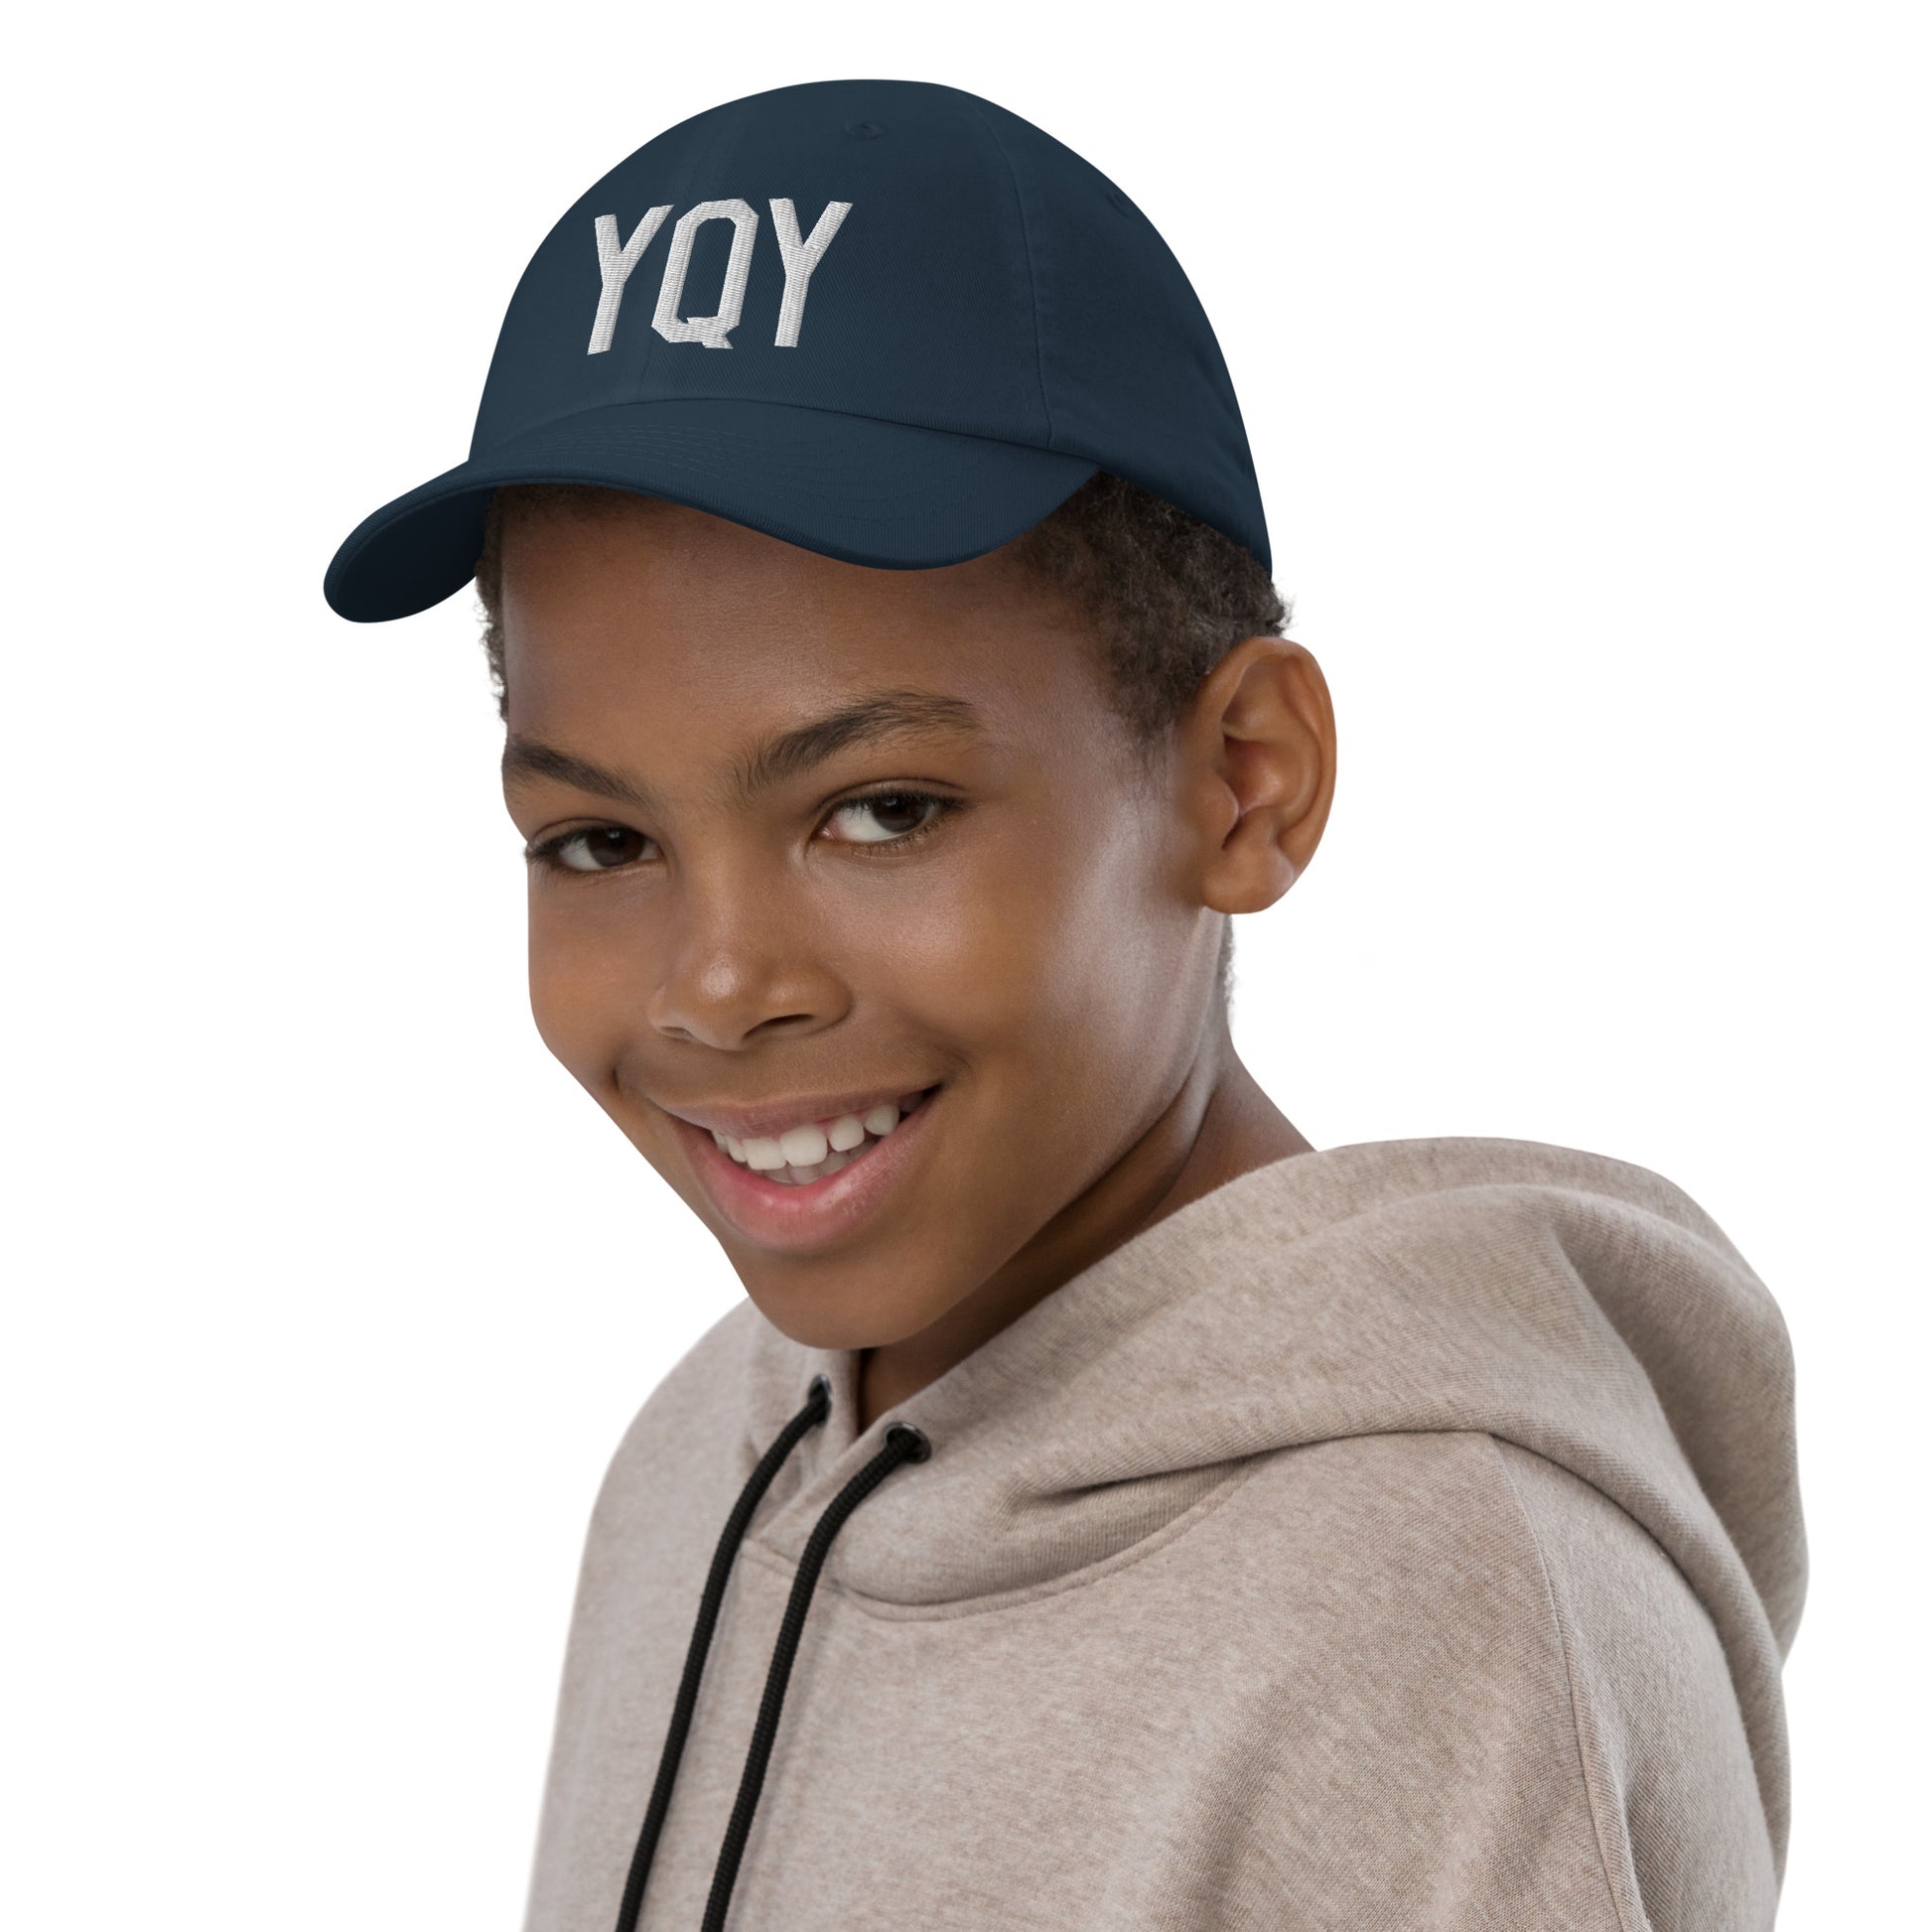 Airport Code Kid's Baseball Cap - White • YQY Sydney • YHM Designs - Image 03